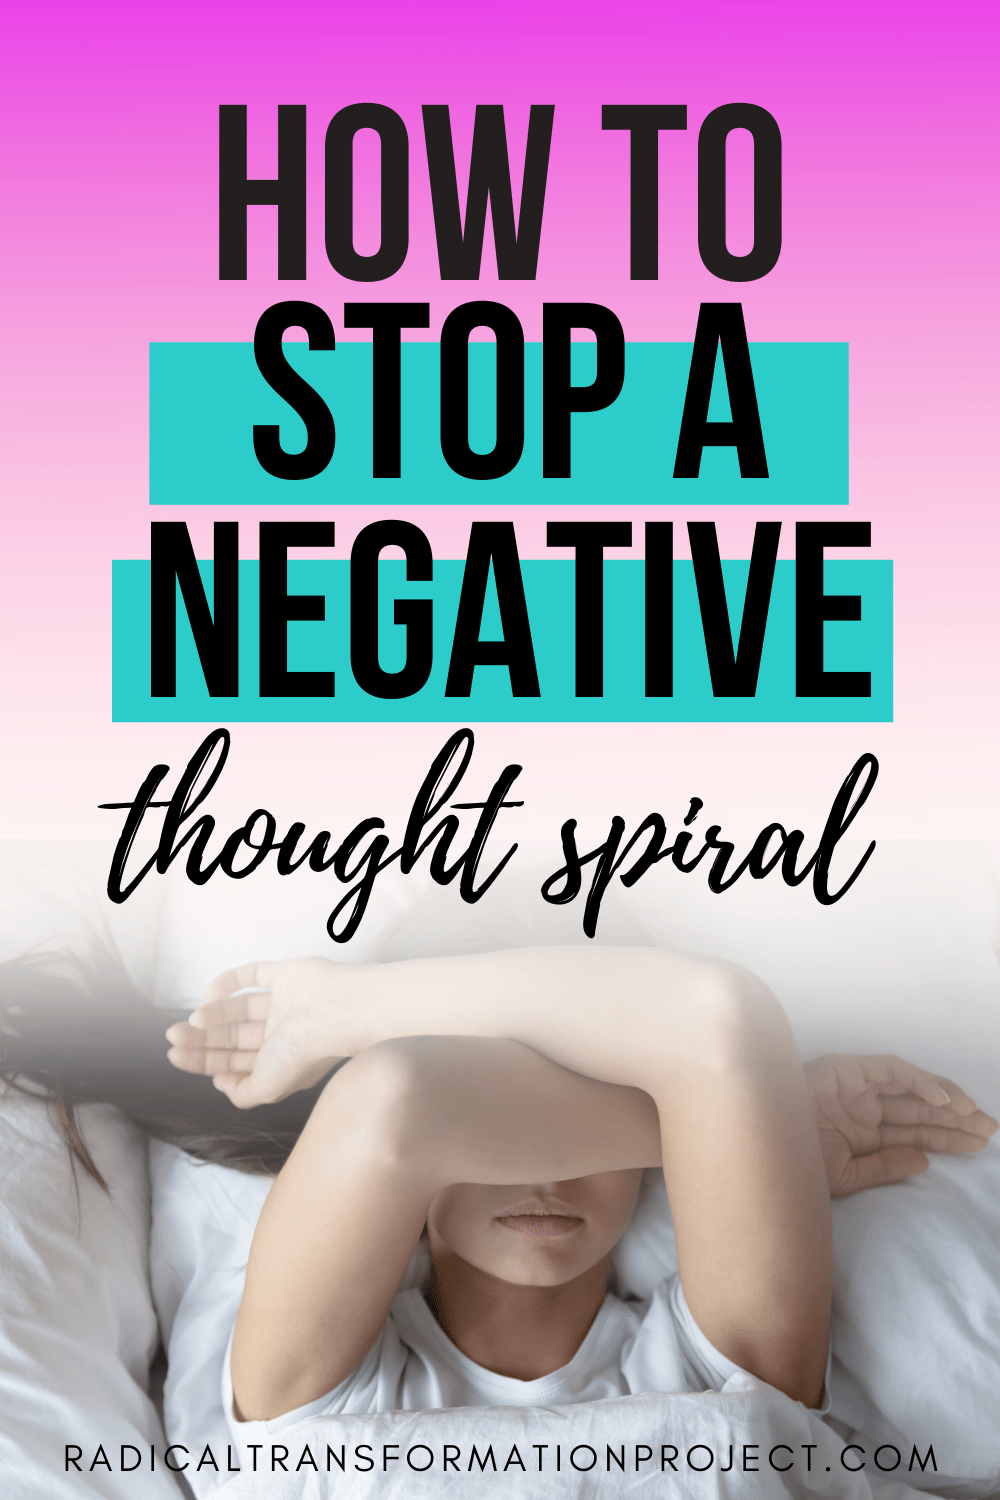 How to Stop a Negative Thought Spiral